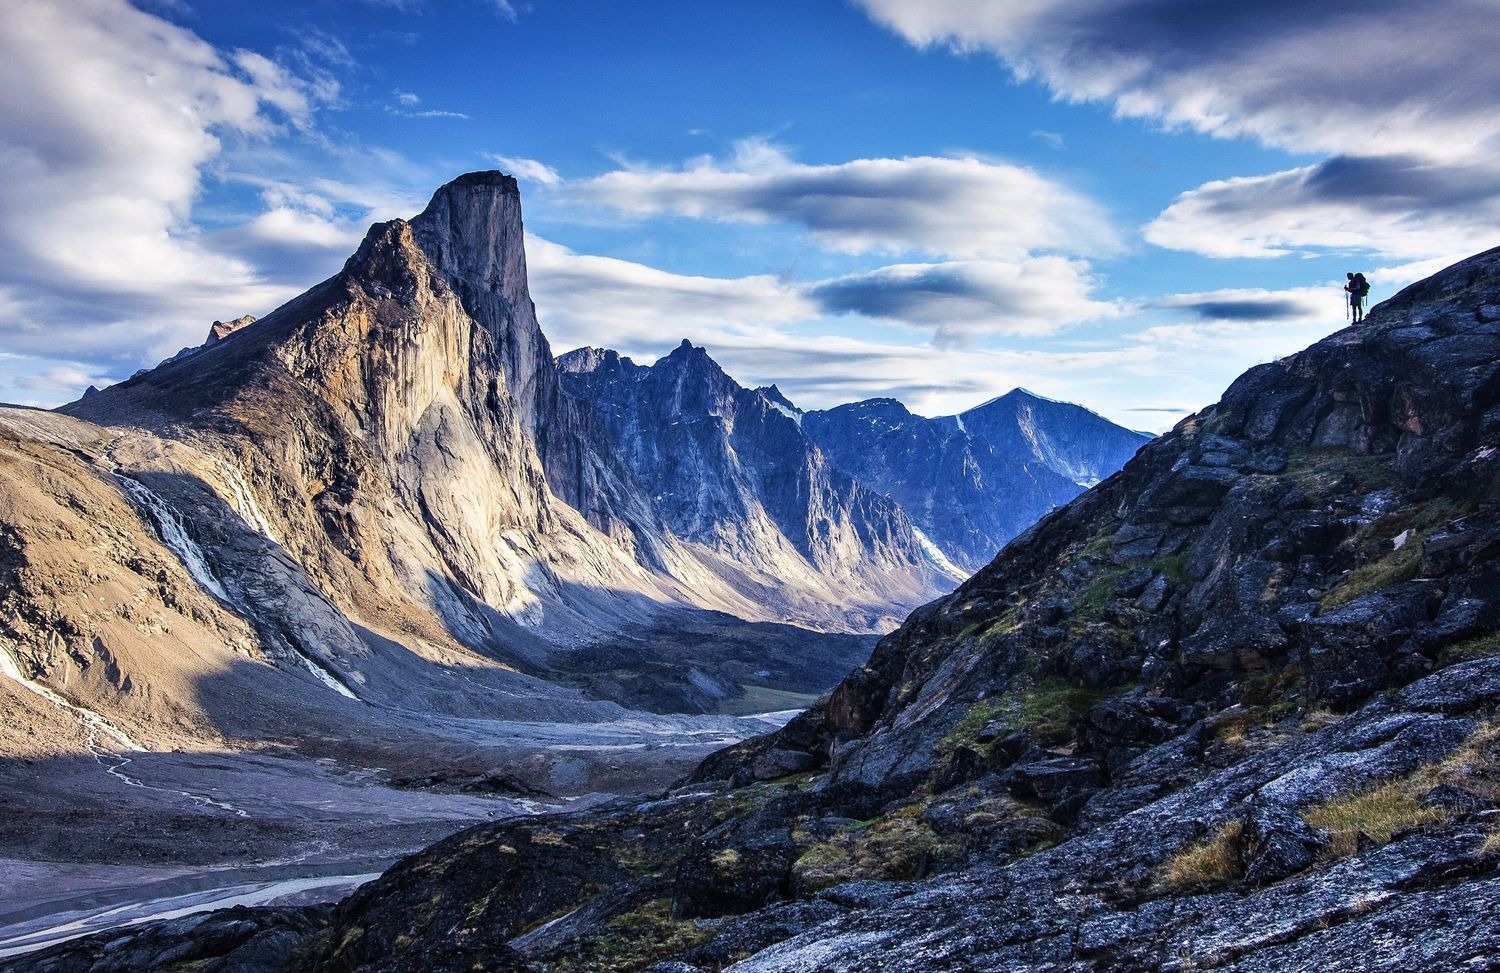 Are You a World Traveler? Test Your Knowledge by Matching These Majestic Natural Sites to Their Countries! Mount Thor, Nunavut, Canada